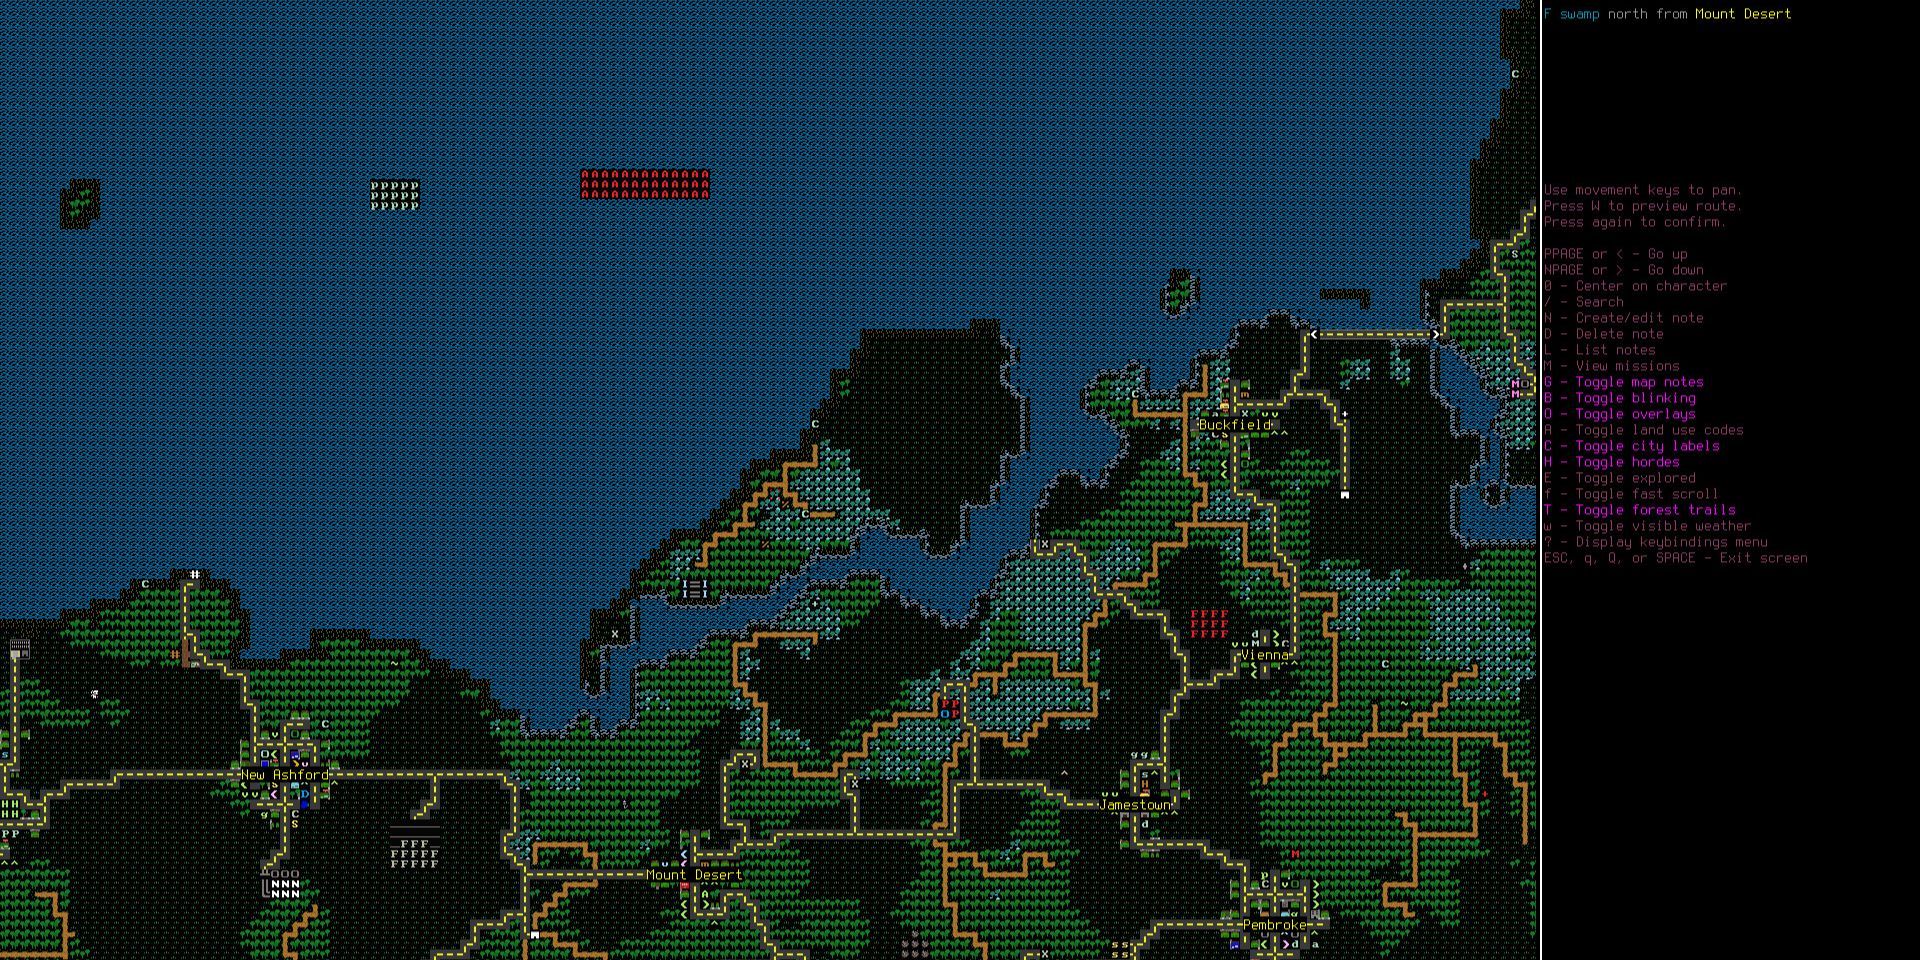 Map view from Cataclysm Dark Days Ahead